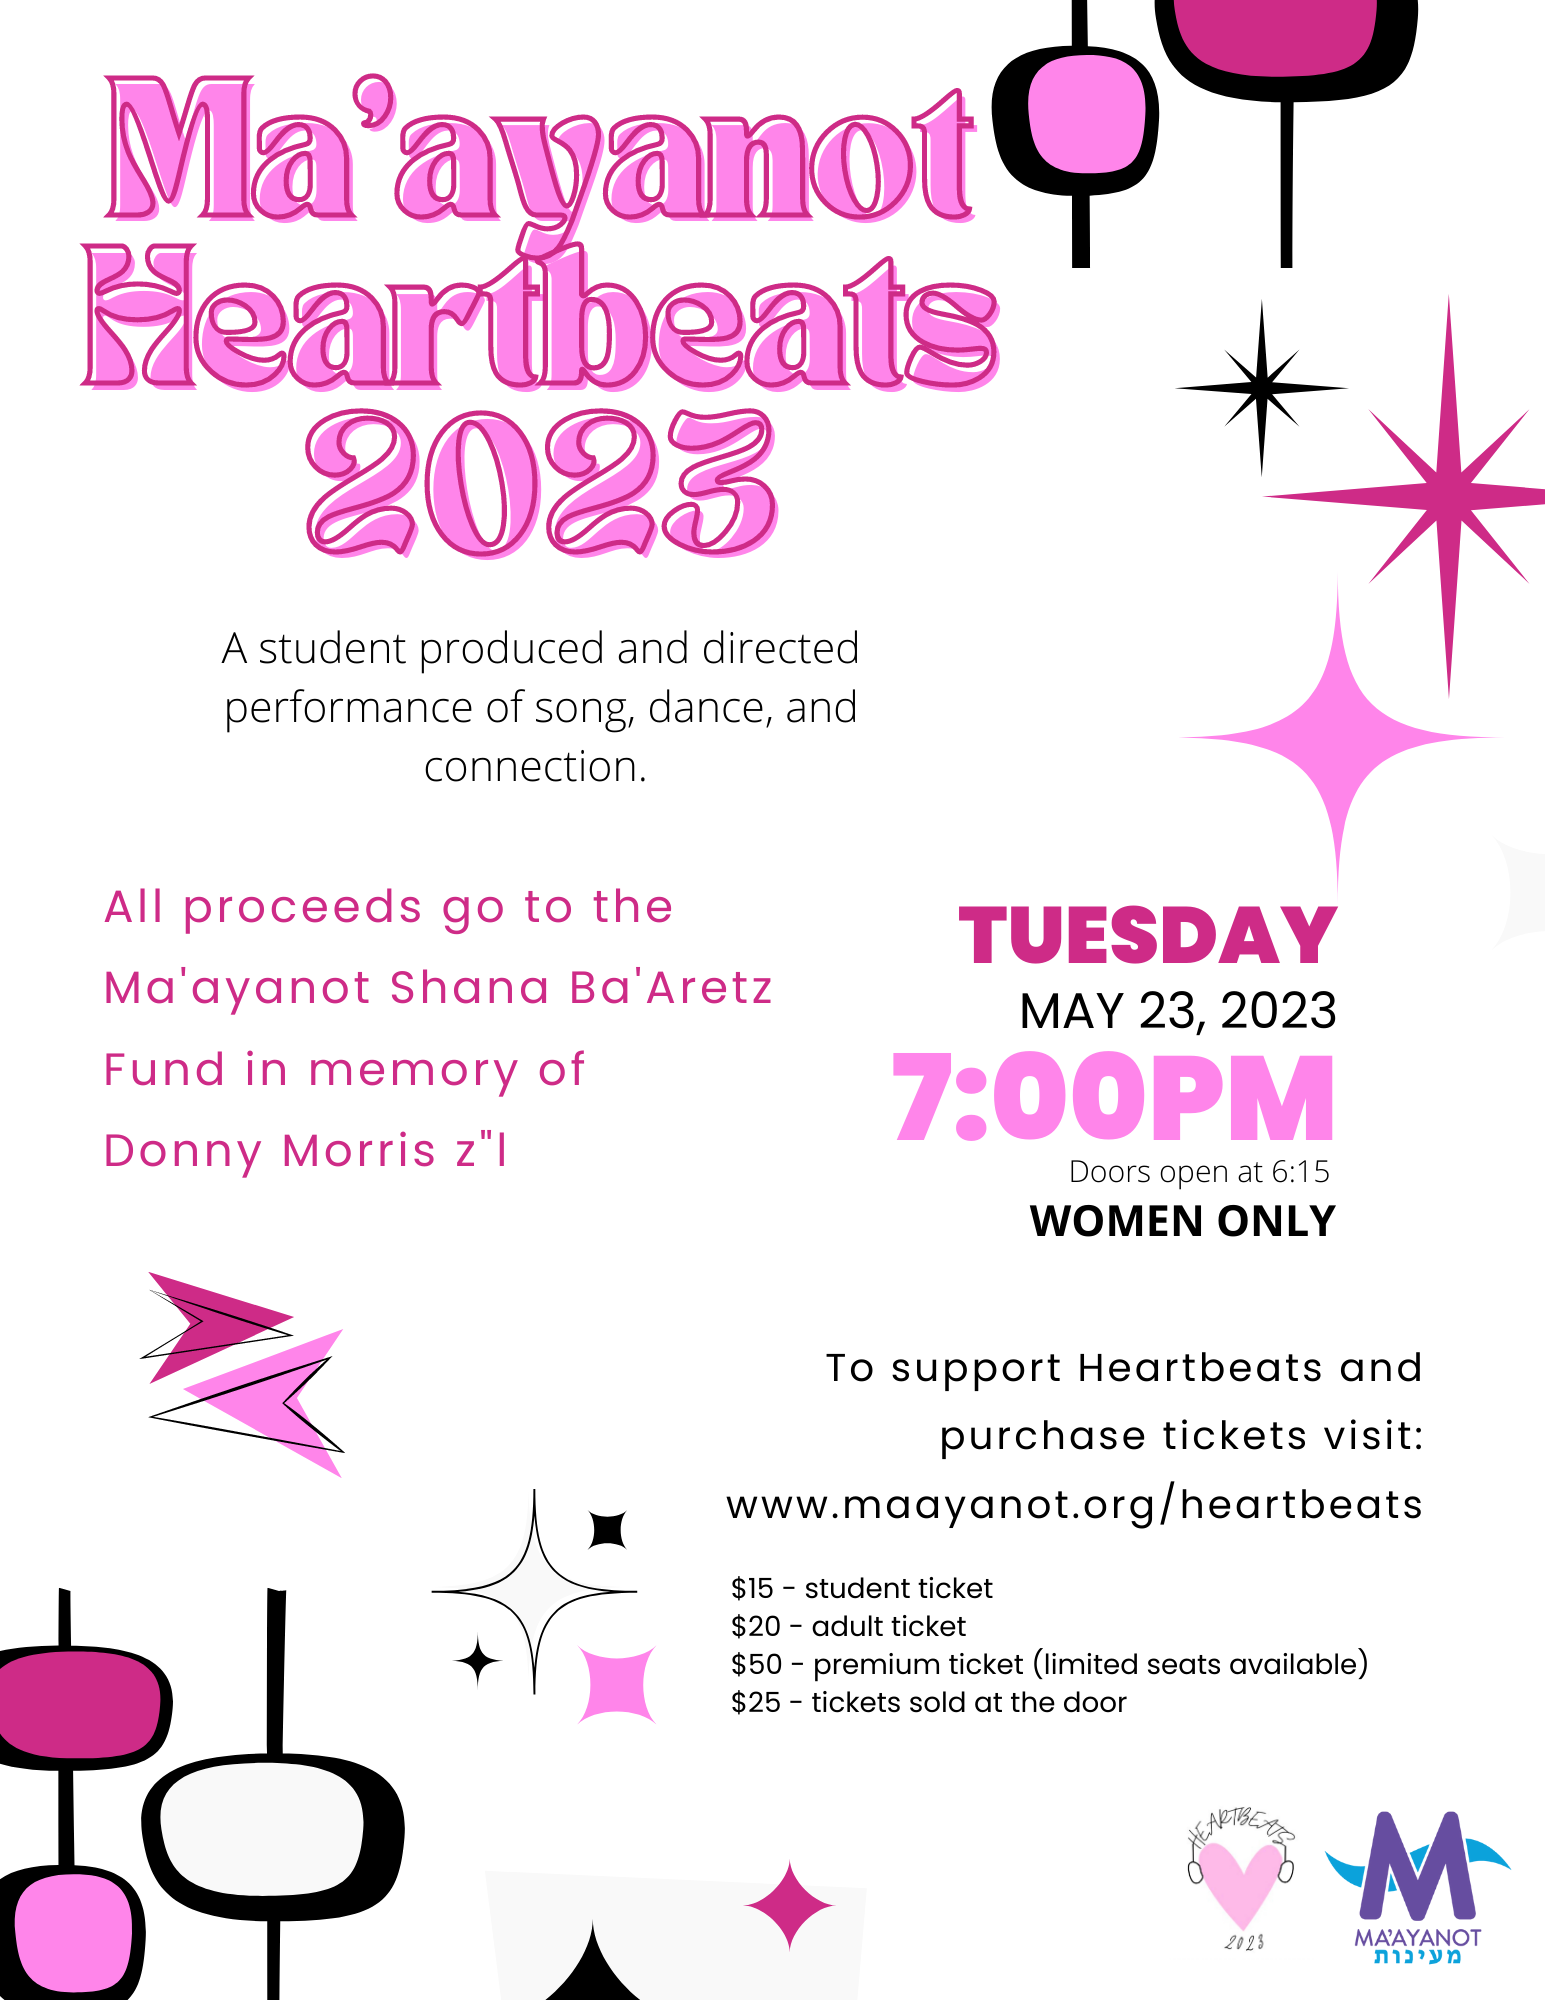 Heartbeats 2023: A student produced and directed performance of song, dance, and connection